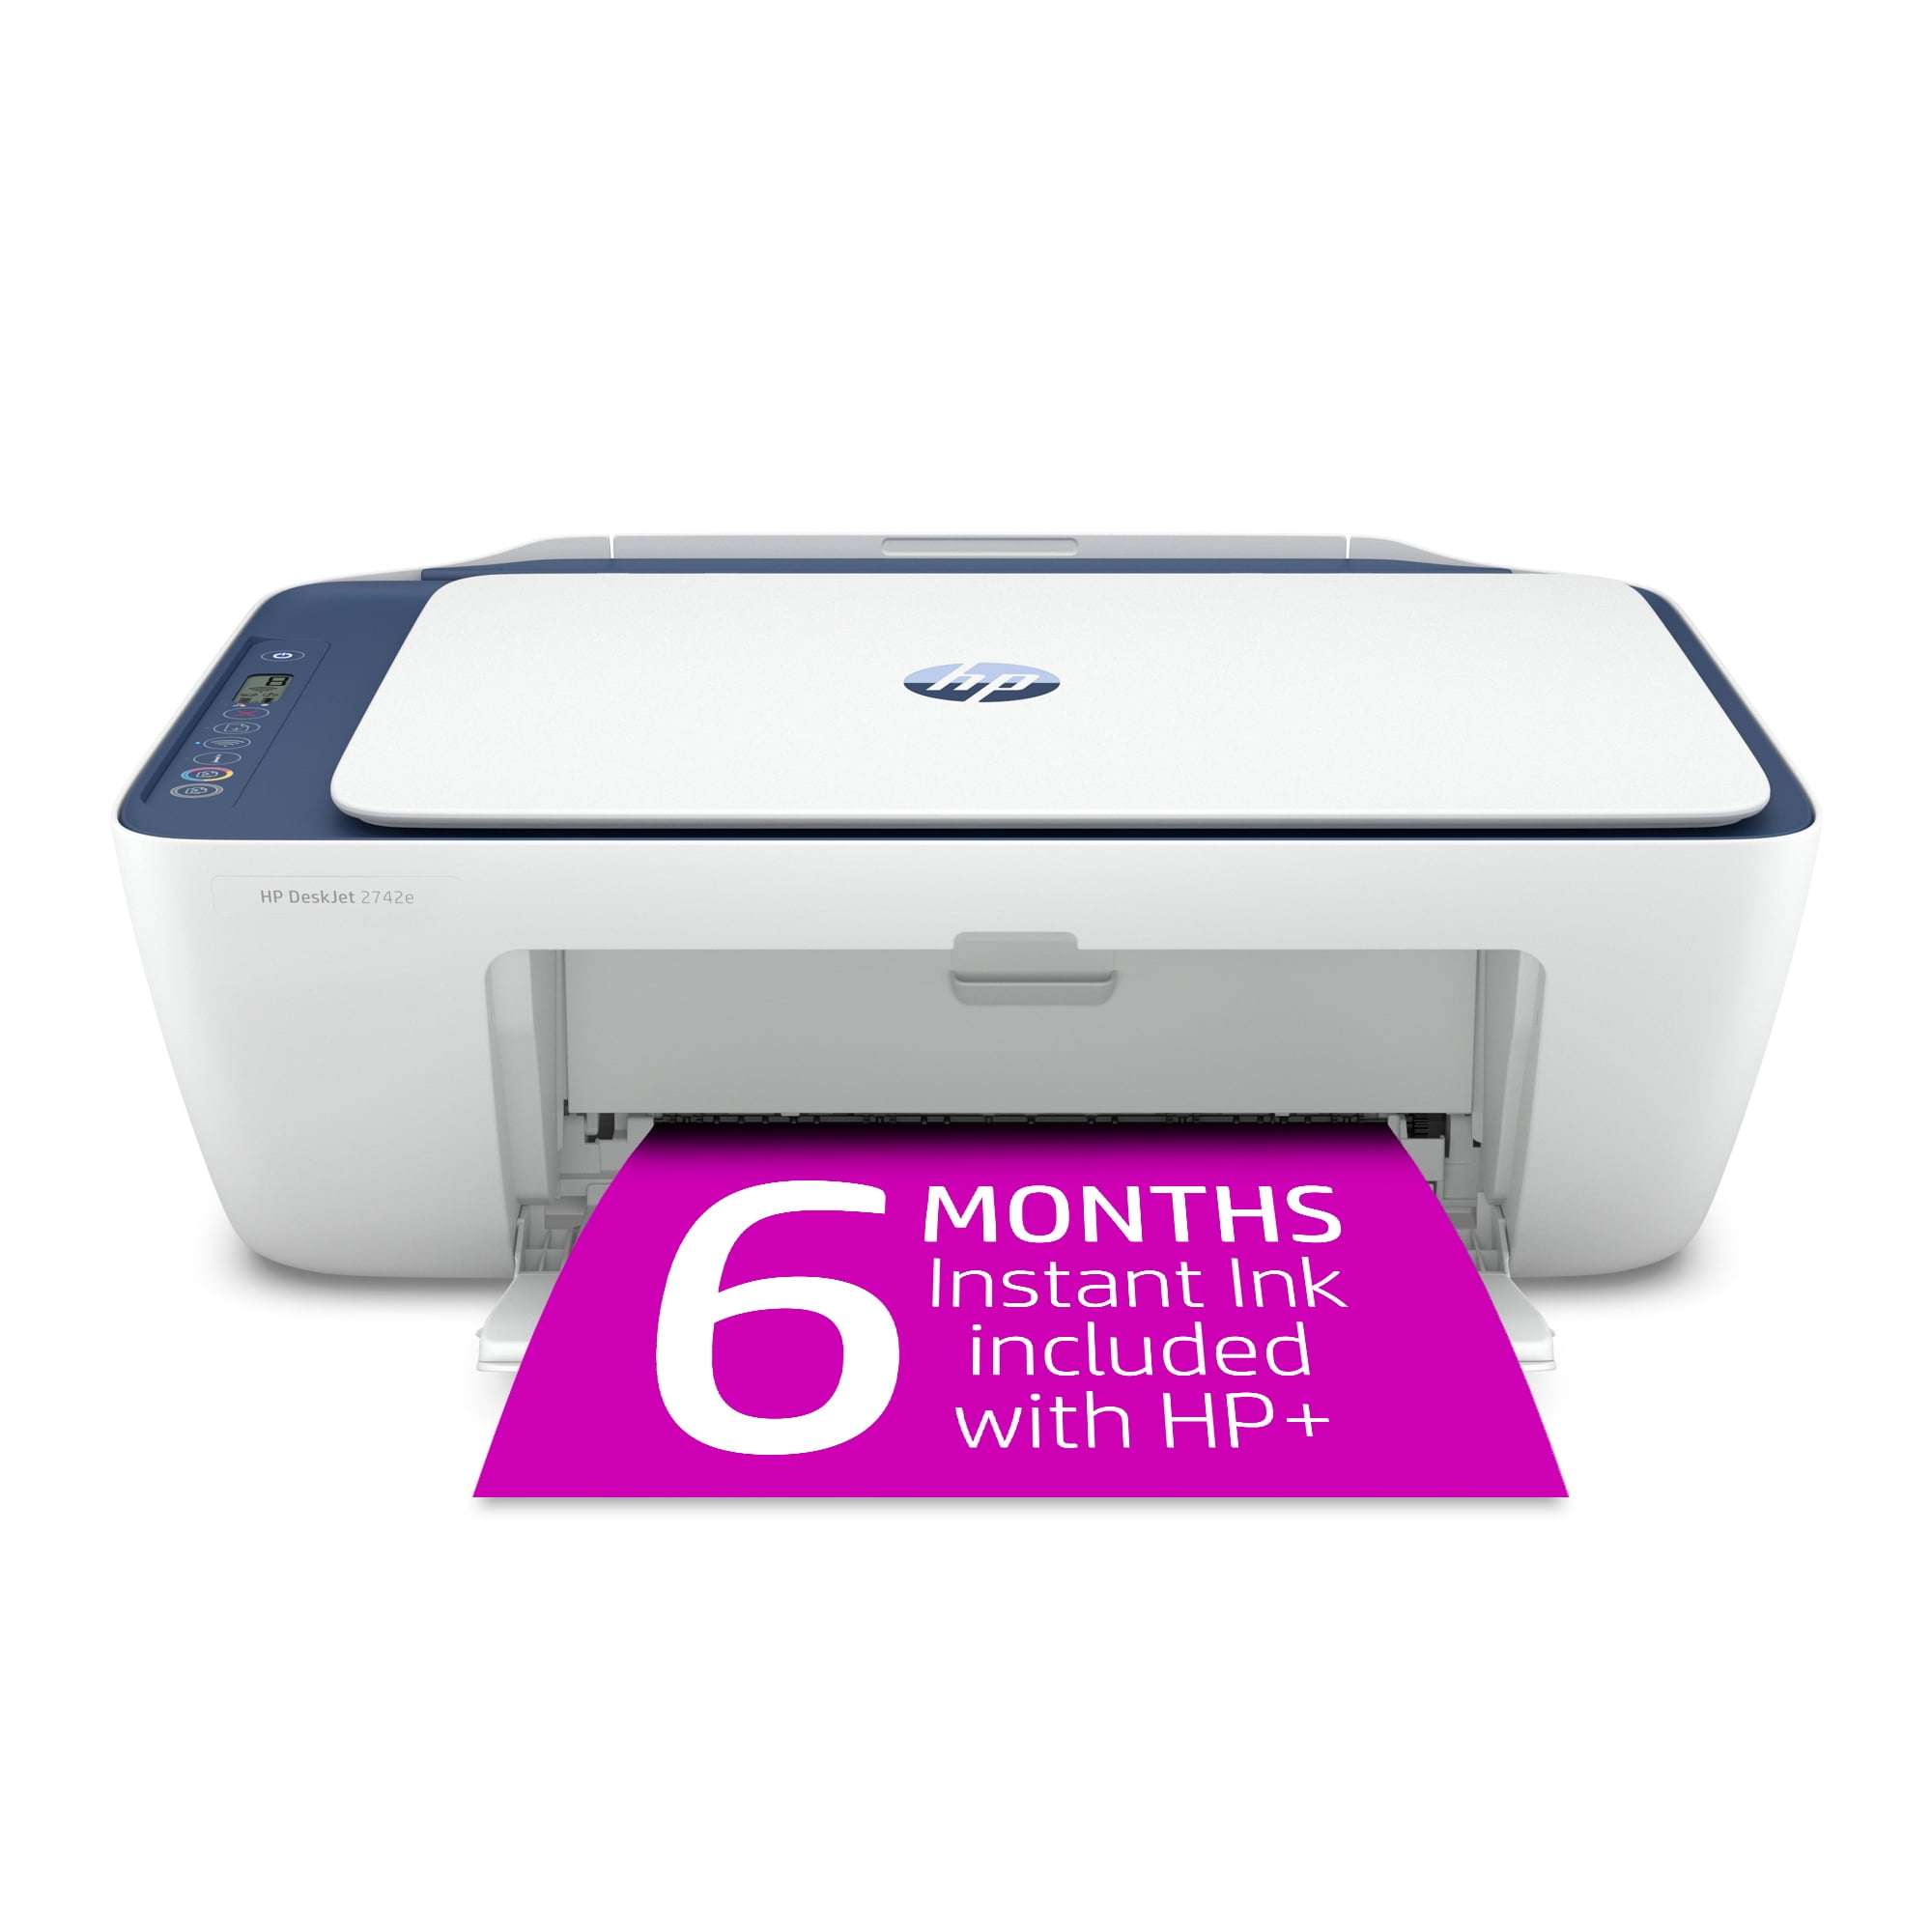 kronblad Rettidig mål HP DeskJet 2742e All-in-One Wireless Color Inkjet Printer (Blue Steel) with  6 Months Instant Ink Included with HP+ - Walmart.com